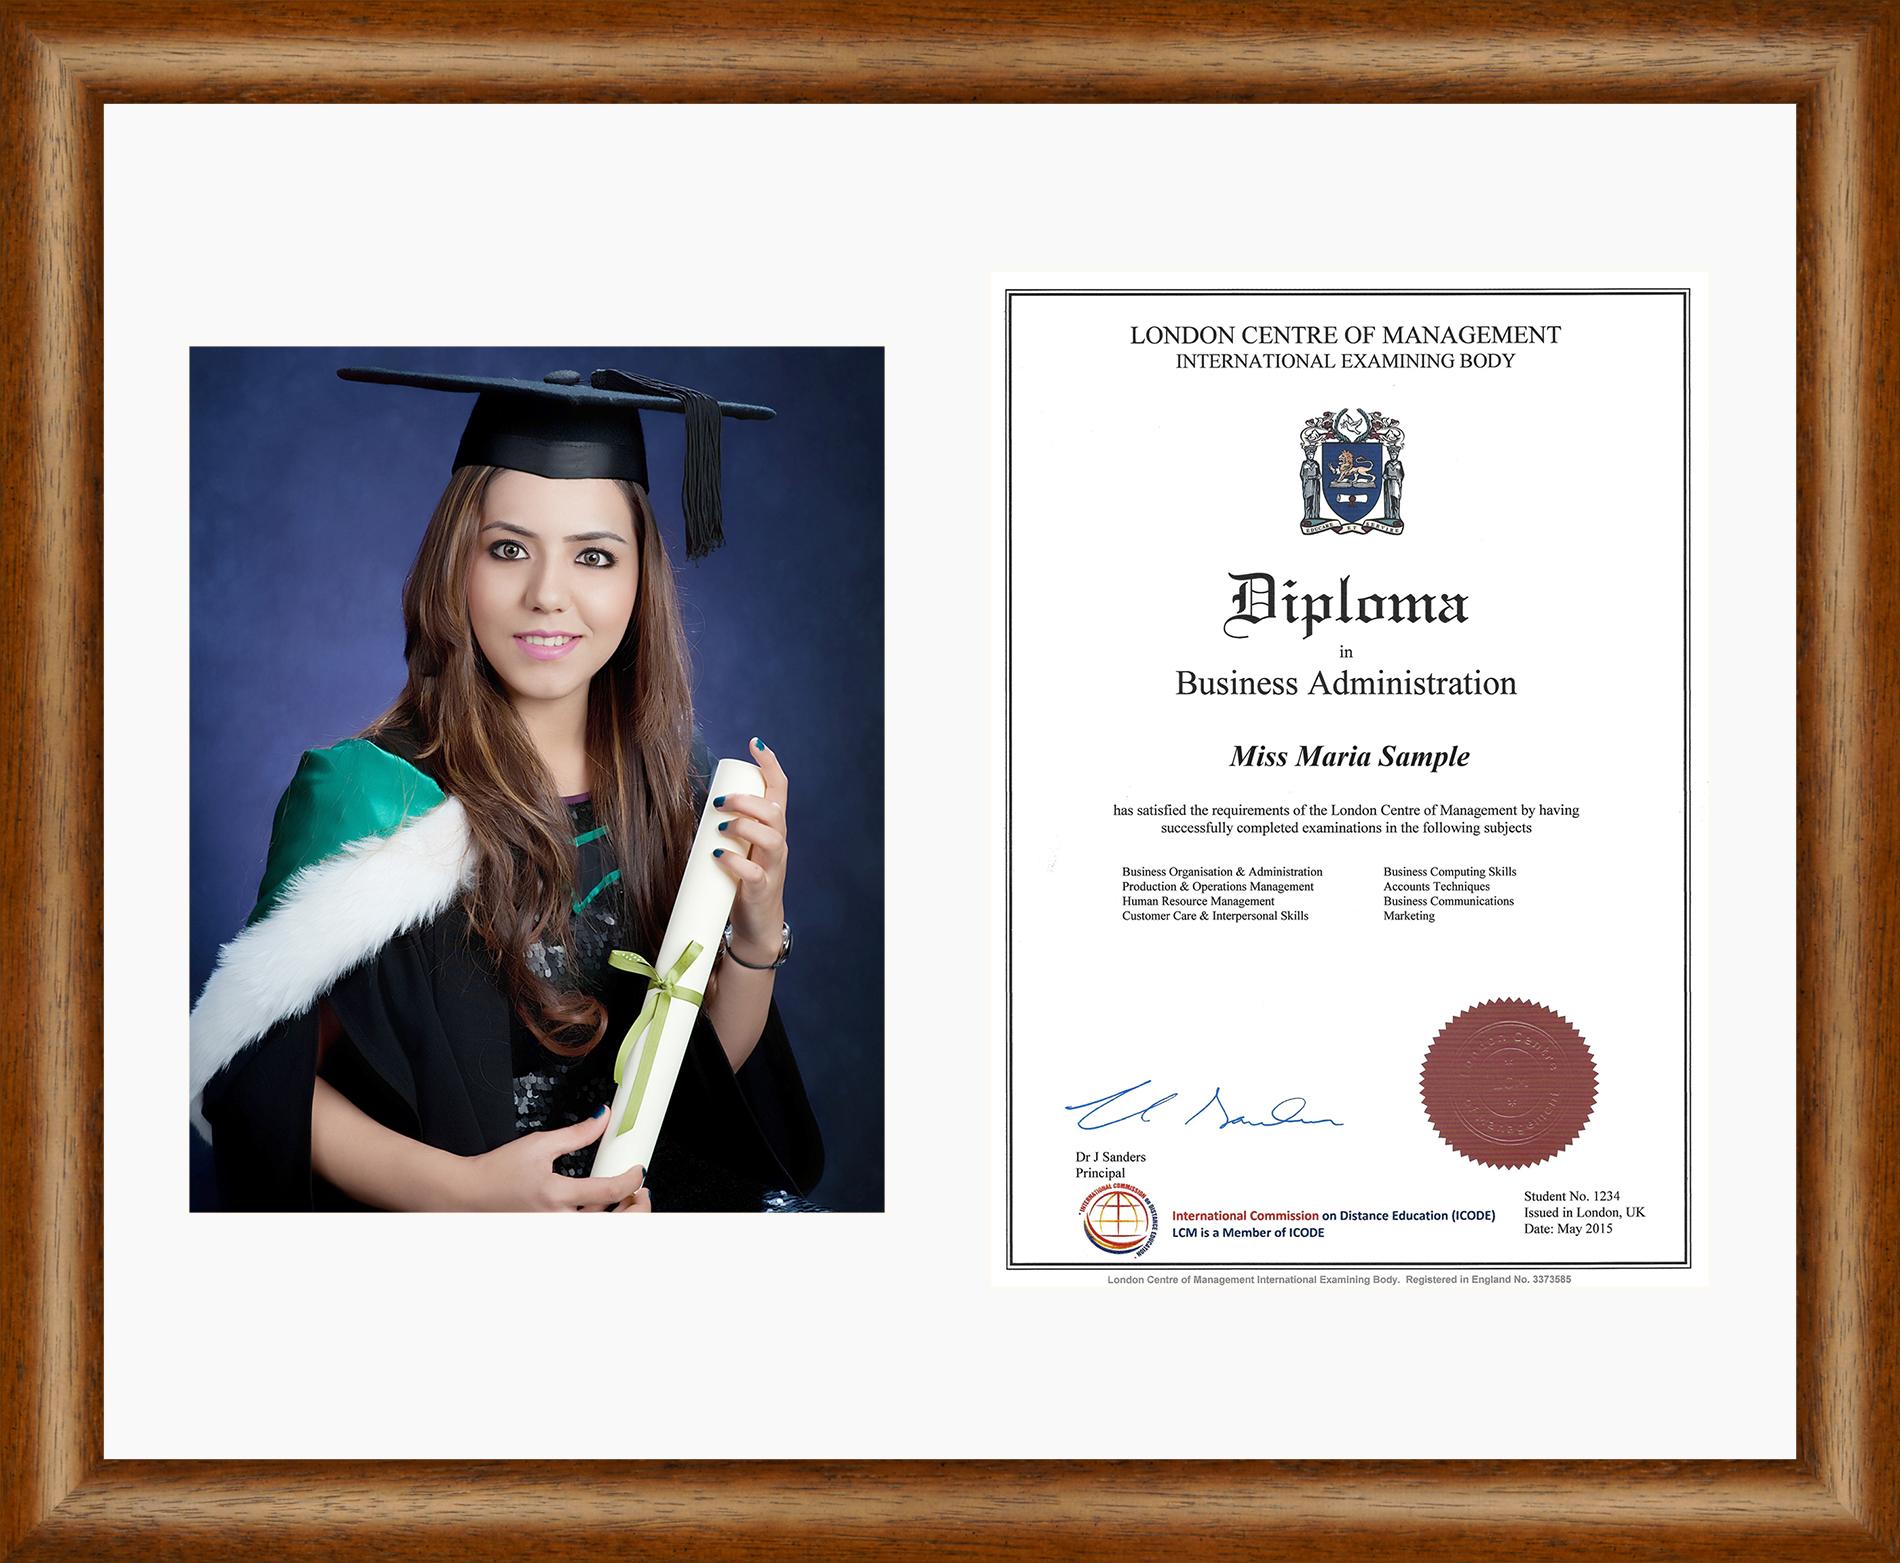 Large Dark Wood Finish Frame A4 10x8 Photo Picture Certificate Graduation Diploma